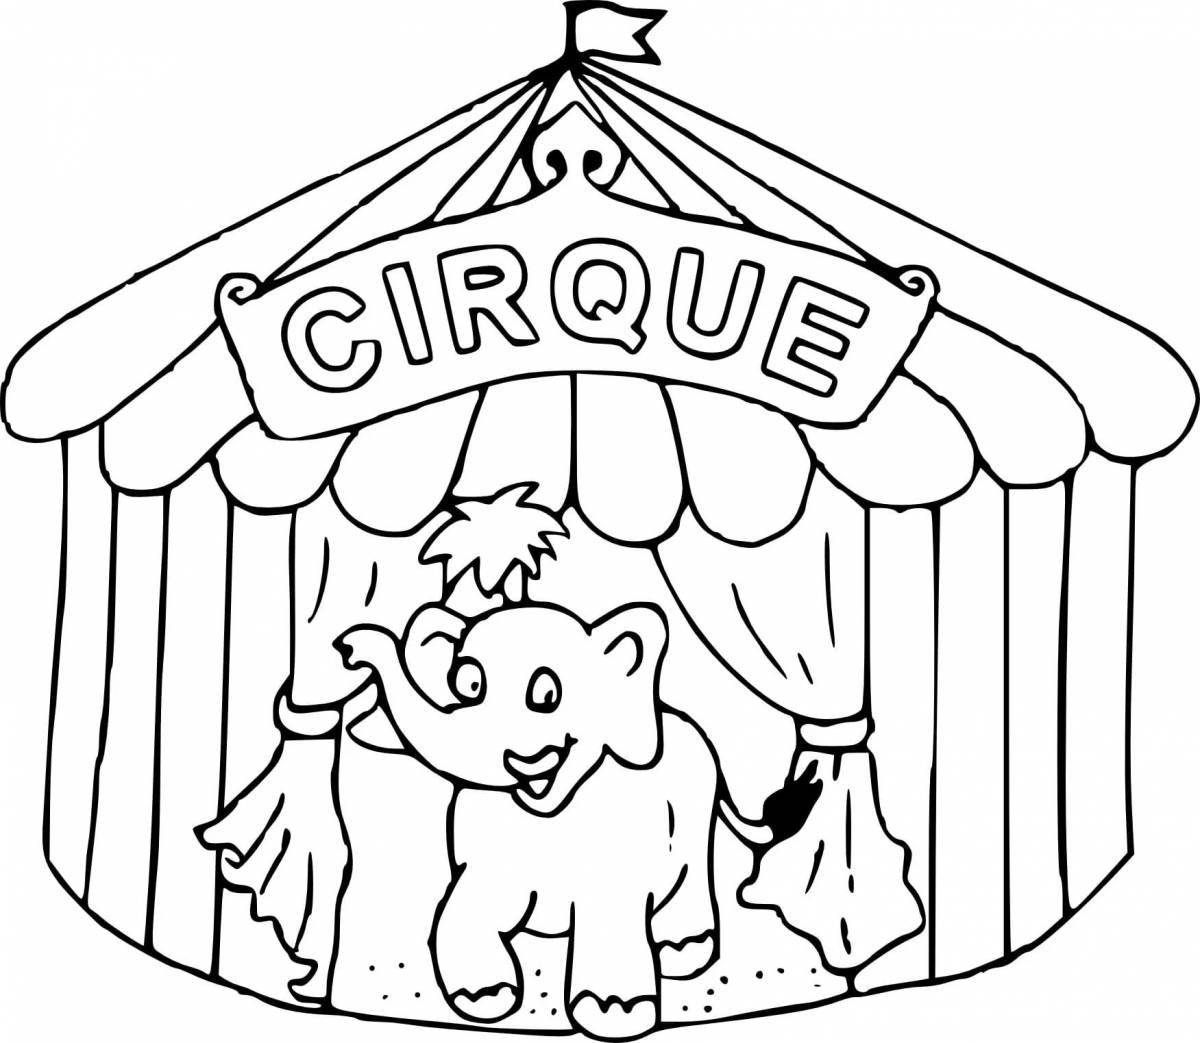 Drama theater poster coloring page